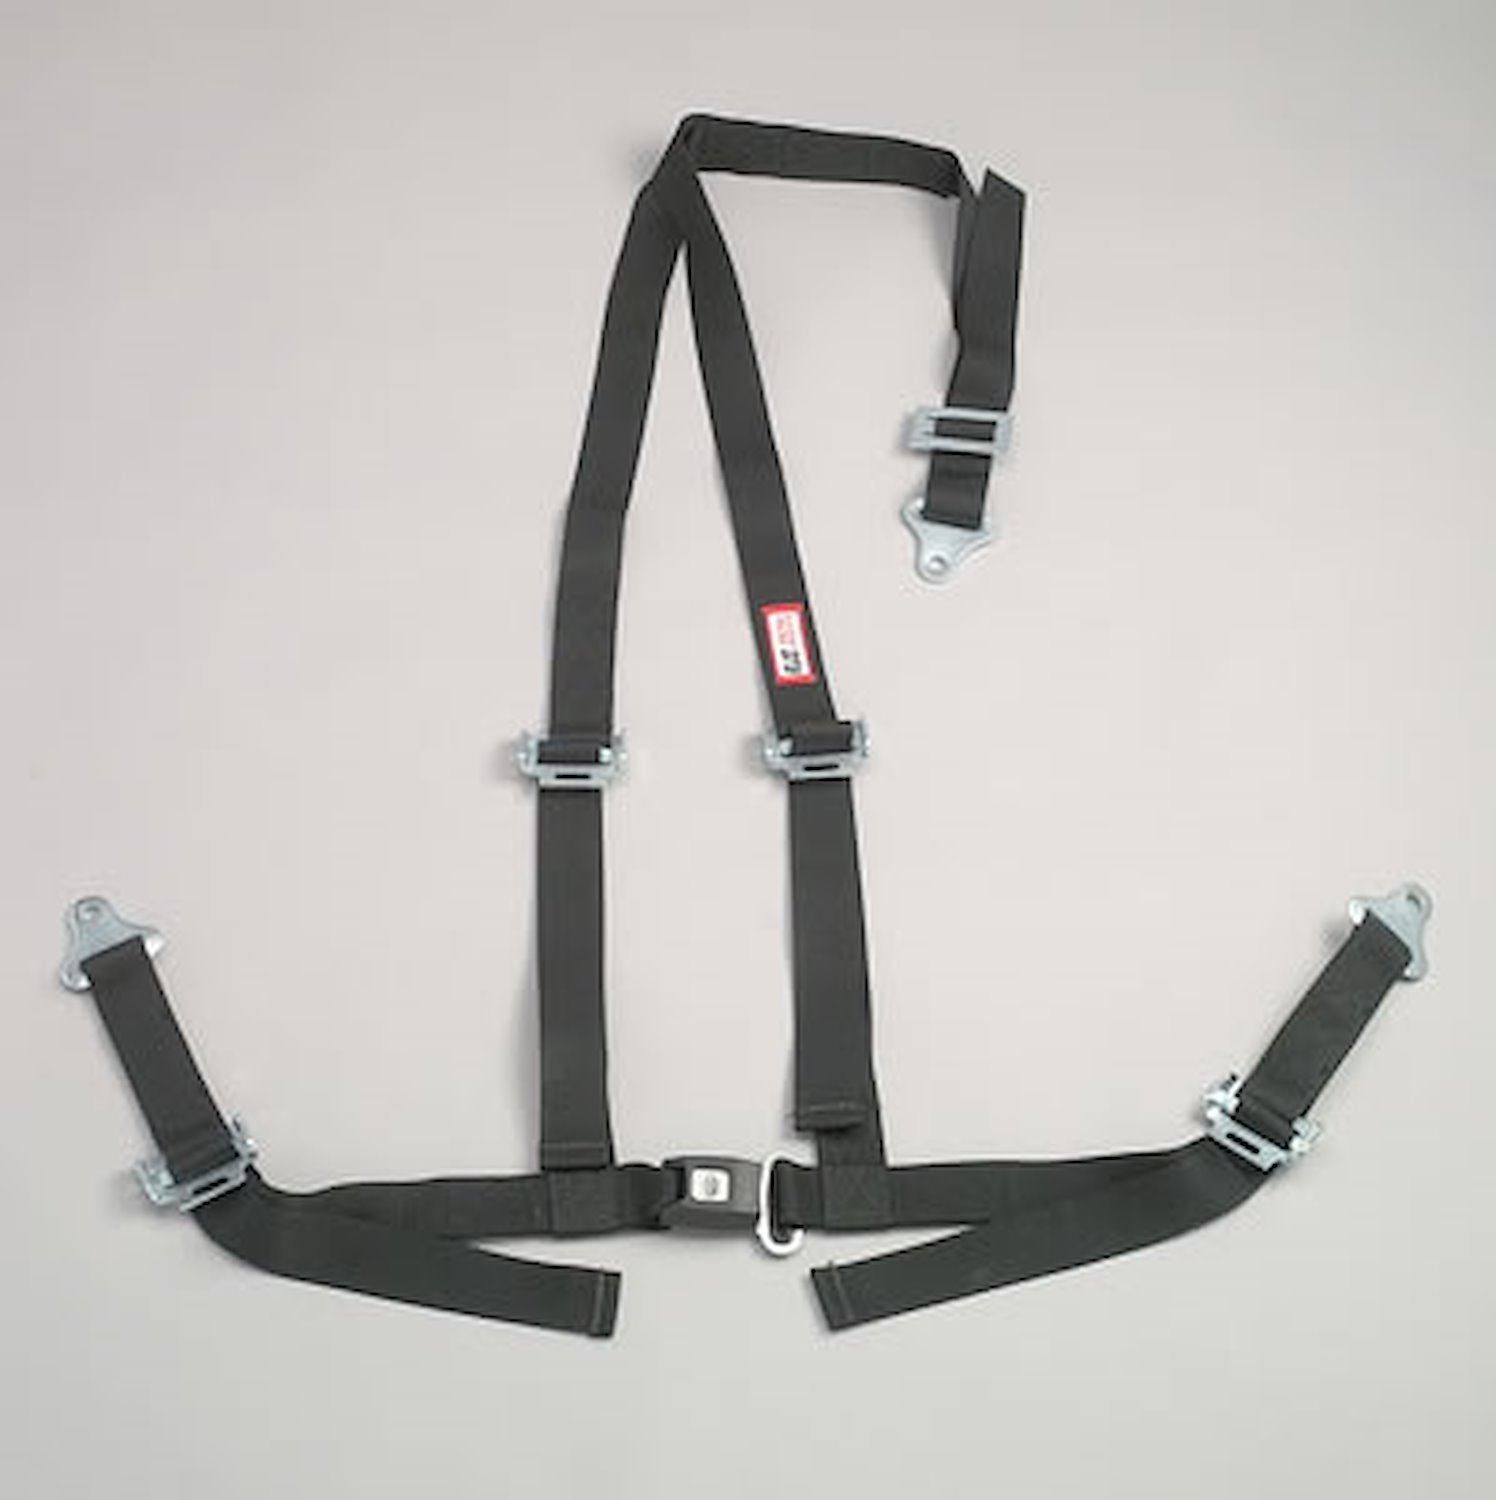 NON-SFI B&T HARNESS 2 PULL DOWN Lap Belt 2 S. H. V ROLL BAR Mount ALL WRAP ENDS w/STERNUM STRAP YELLOW